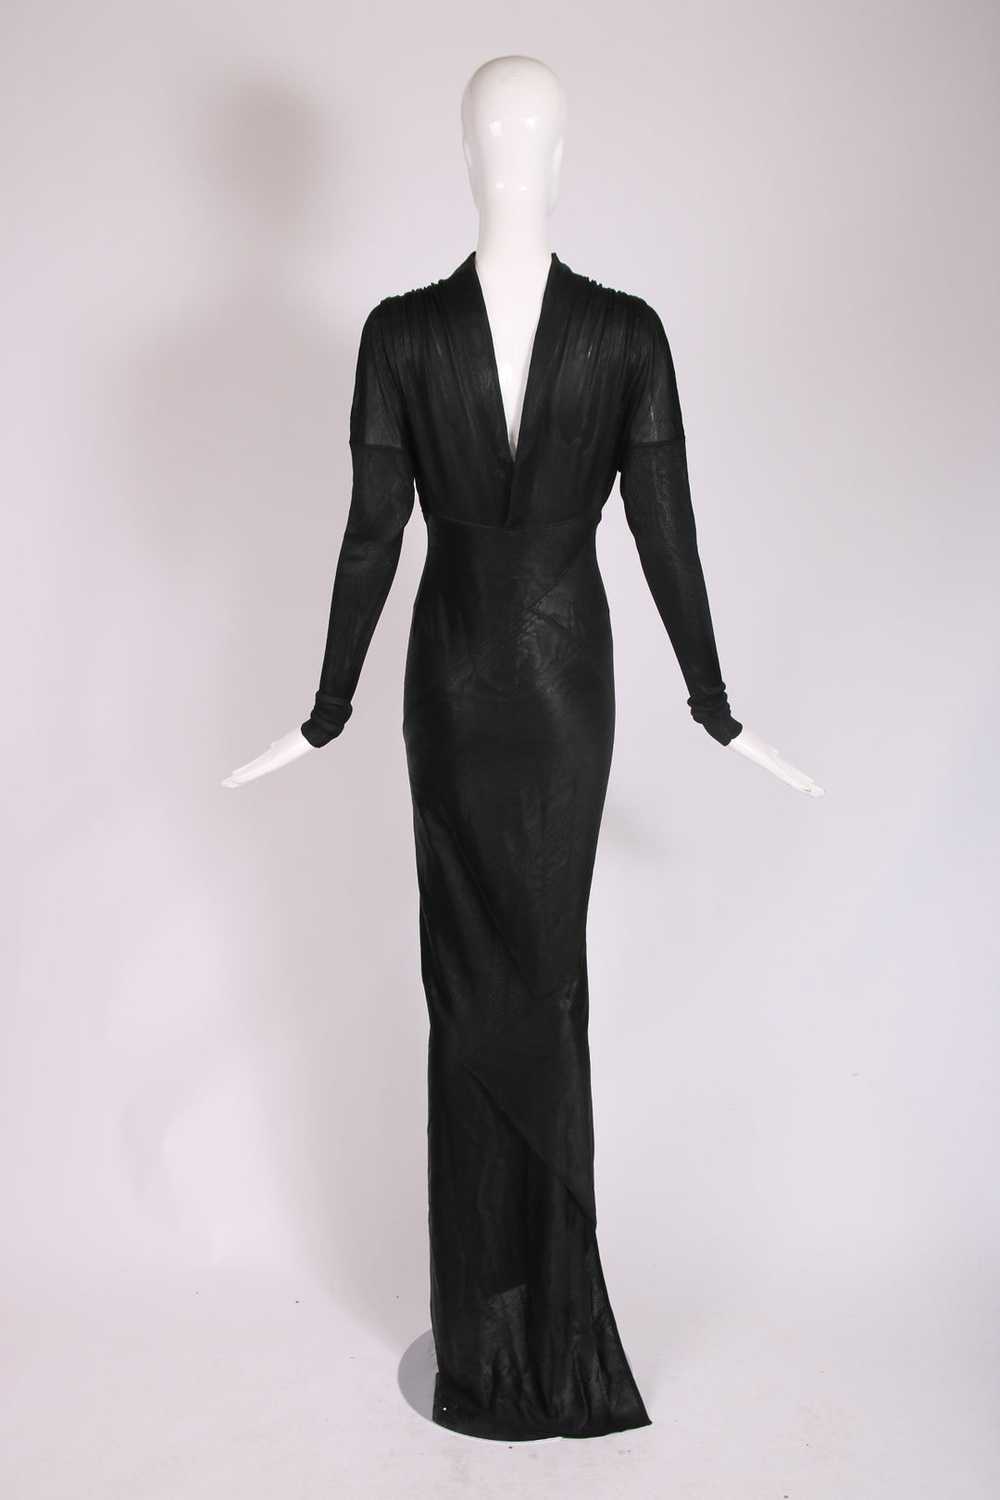 1986 Azzedine Alaia Black Trained Gown - image 5